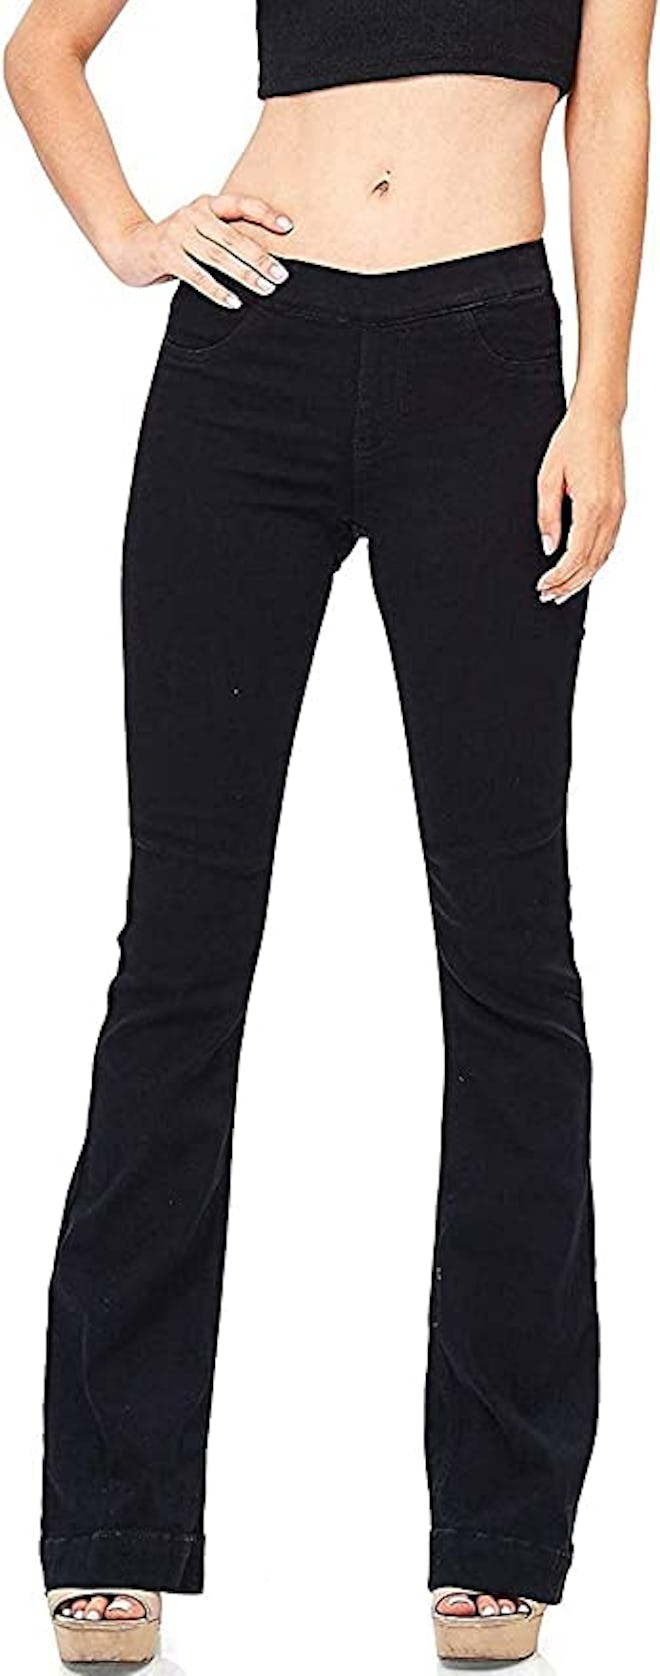 Cello Mid-Waist Skinny Fit Bootcut Pants